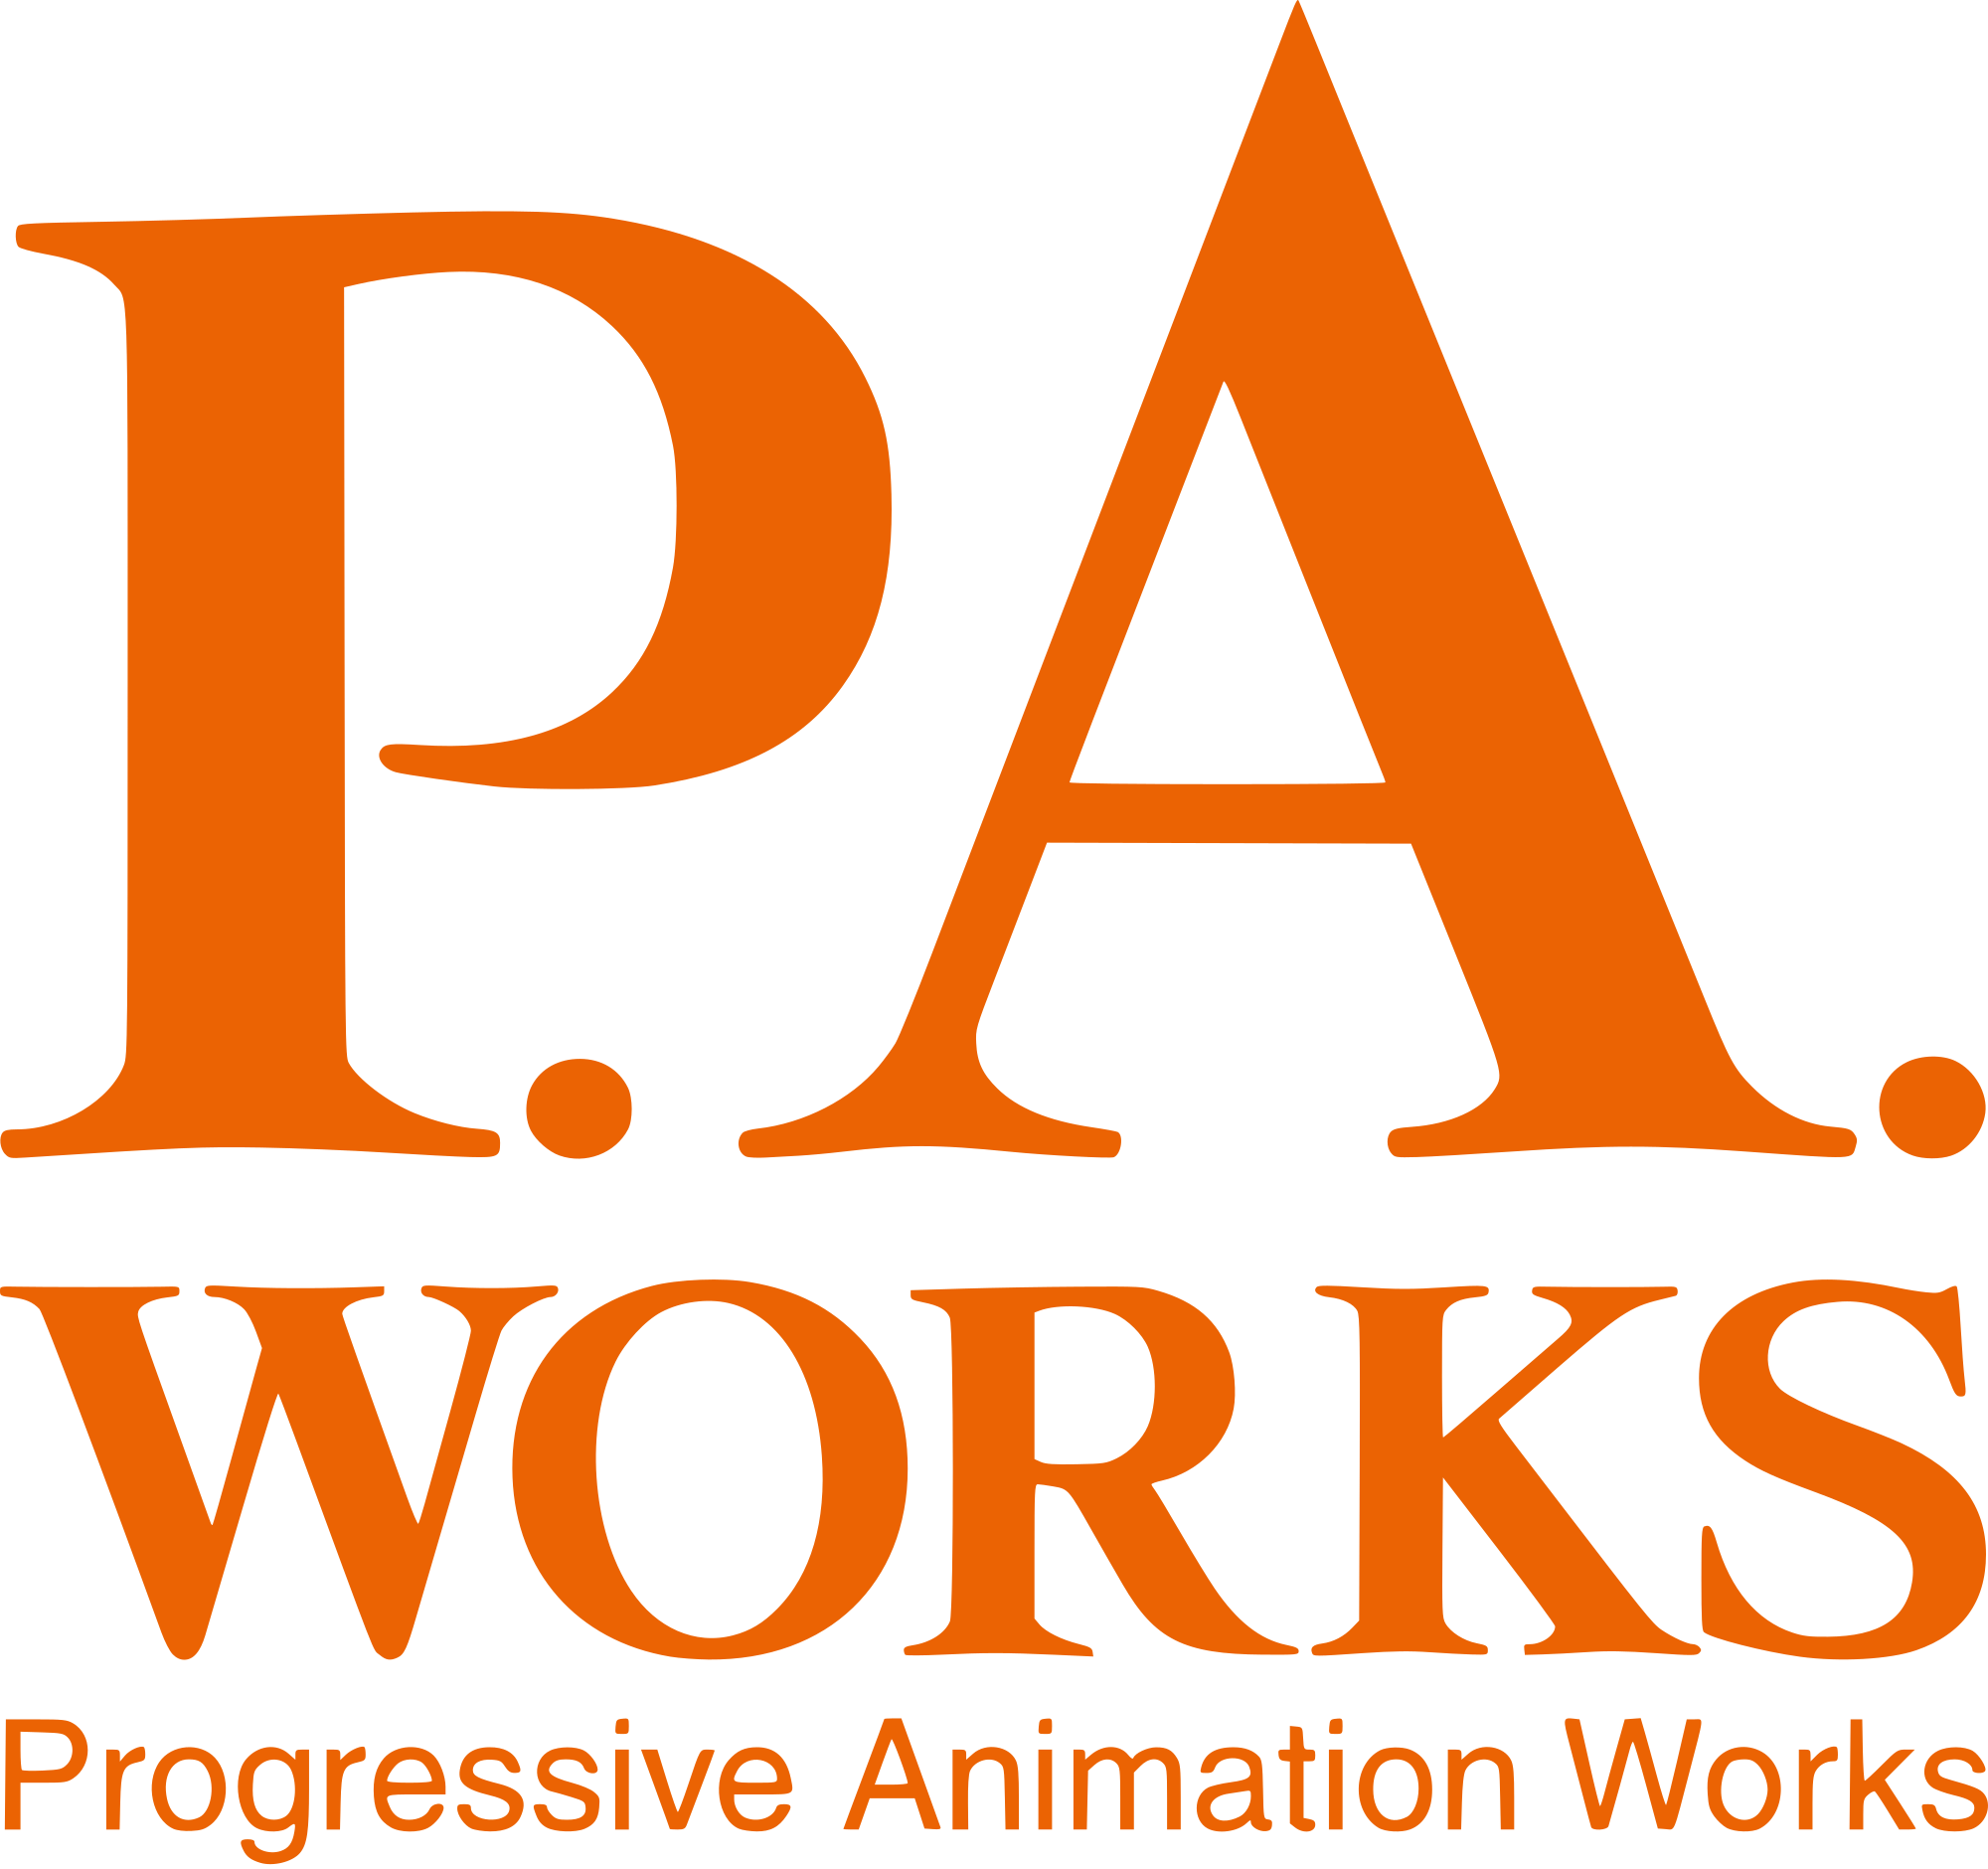 P.A.Works